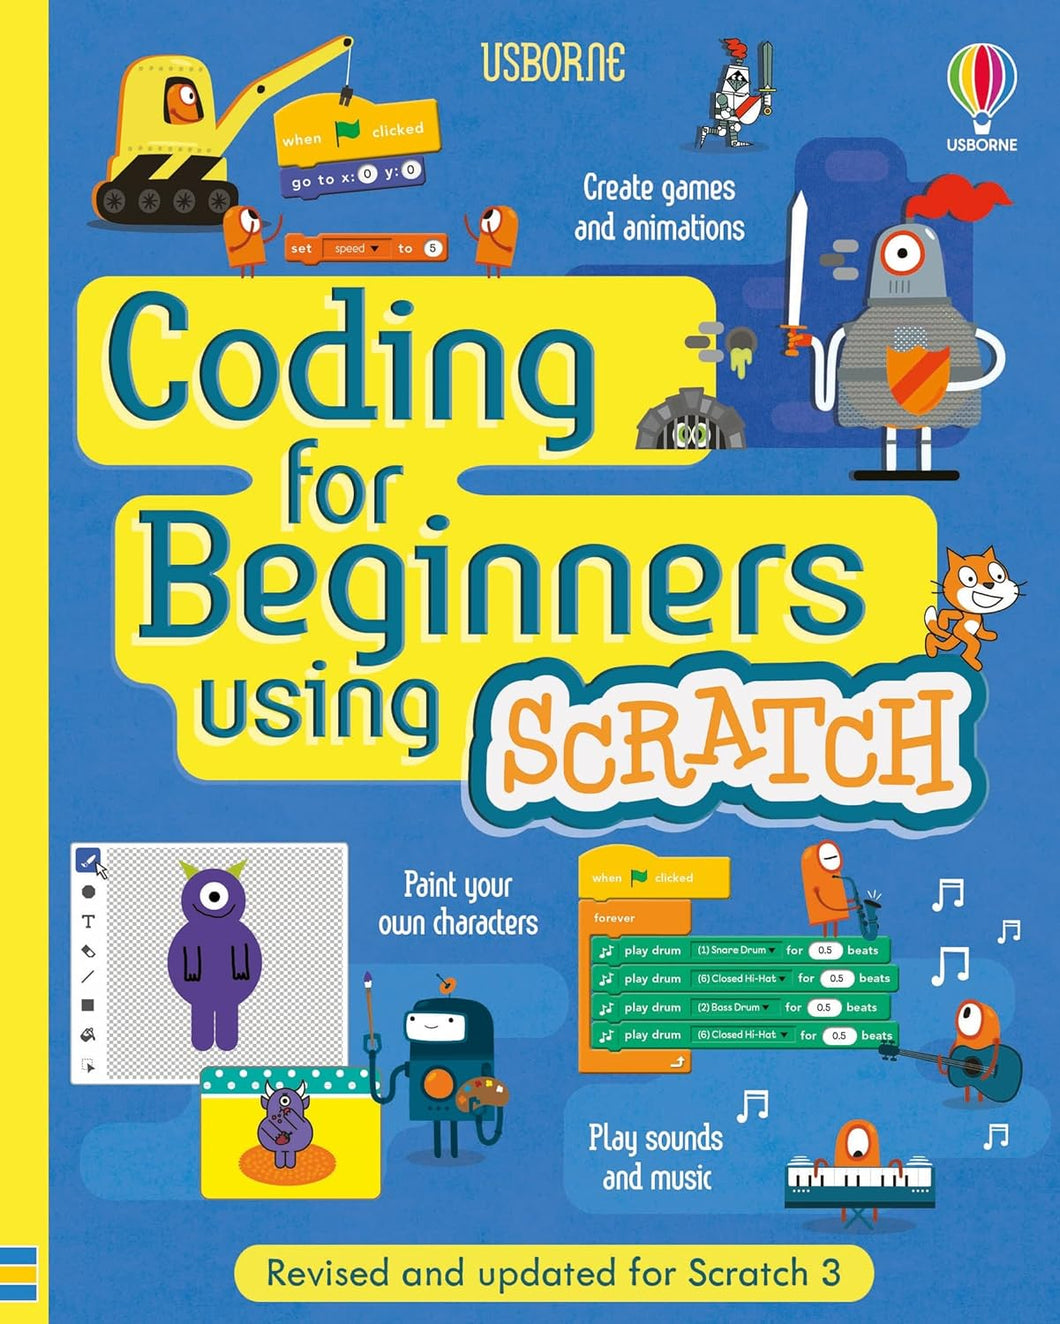 Coding for Beginners using Scratch